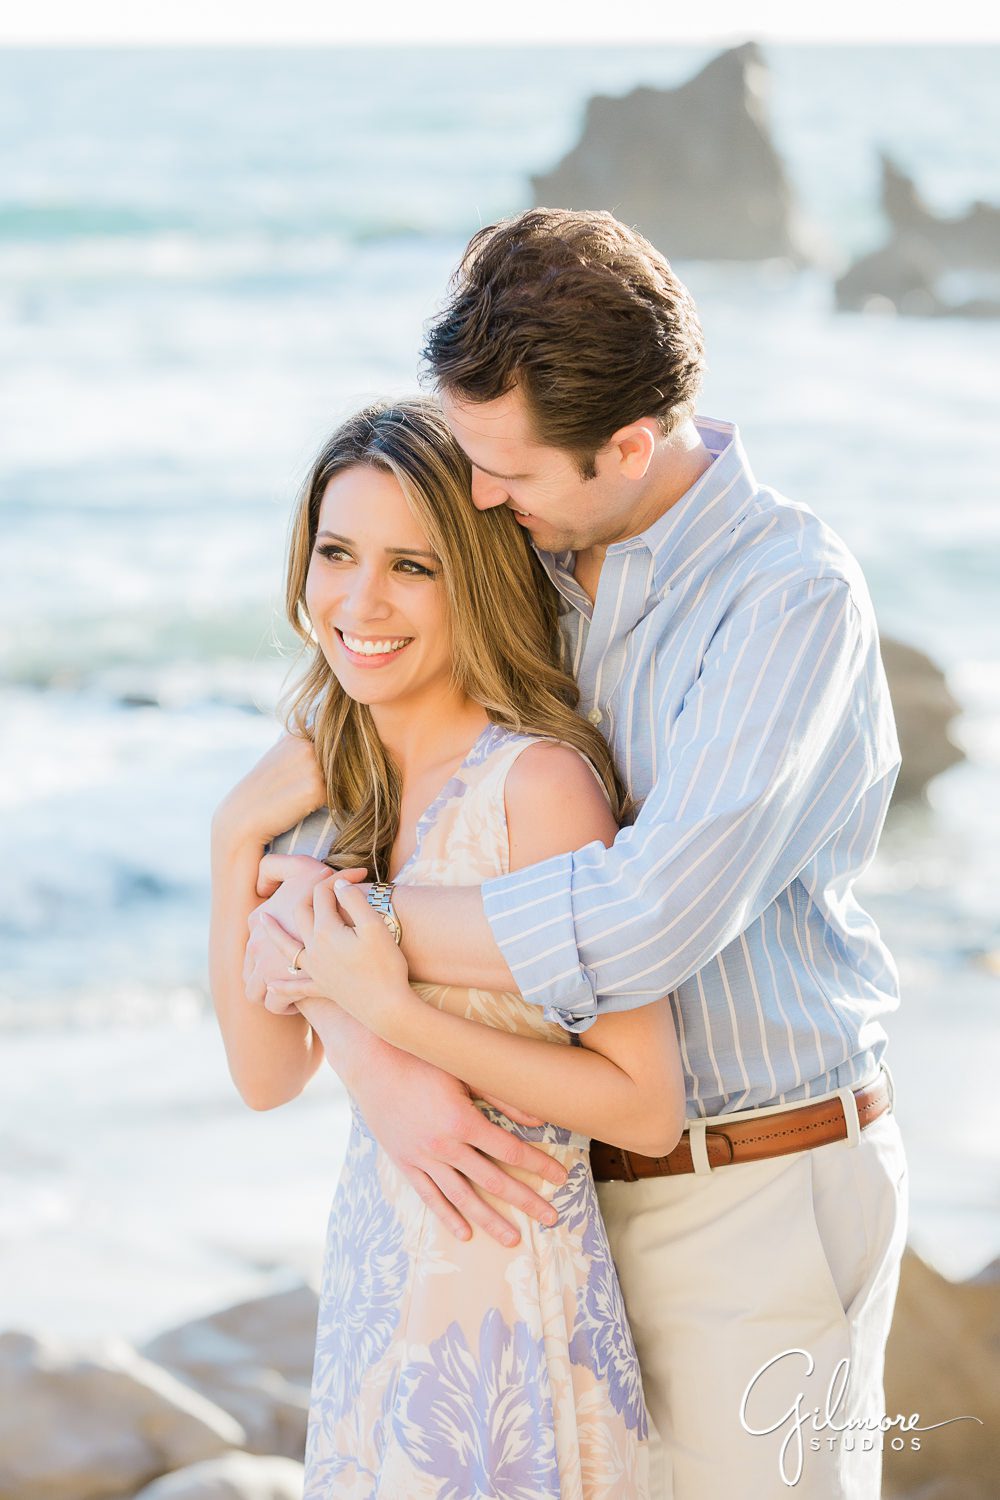 Newport Beach Engagement Session, sunset, engaged couple, waves, ocean, rocks, portrait, natural light, little corona del mar, romantic, outfits, casual